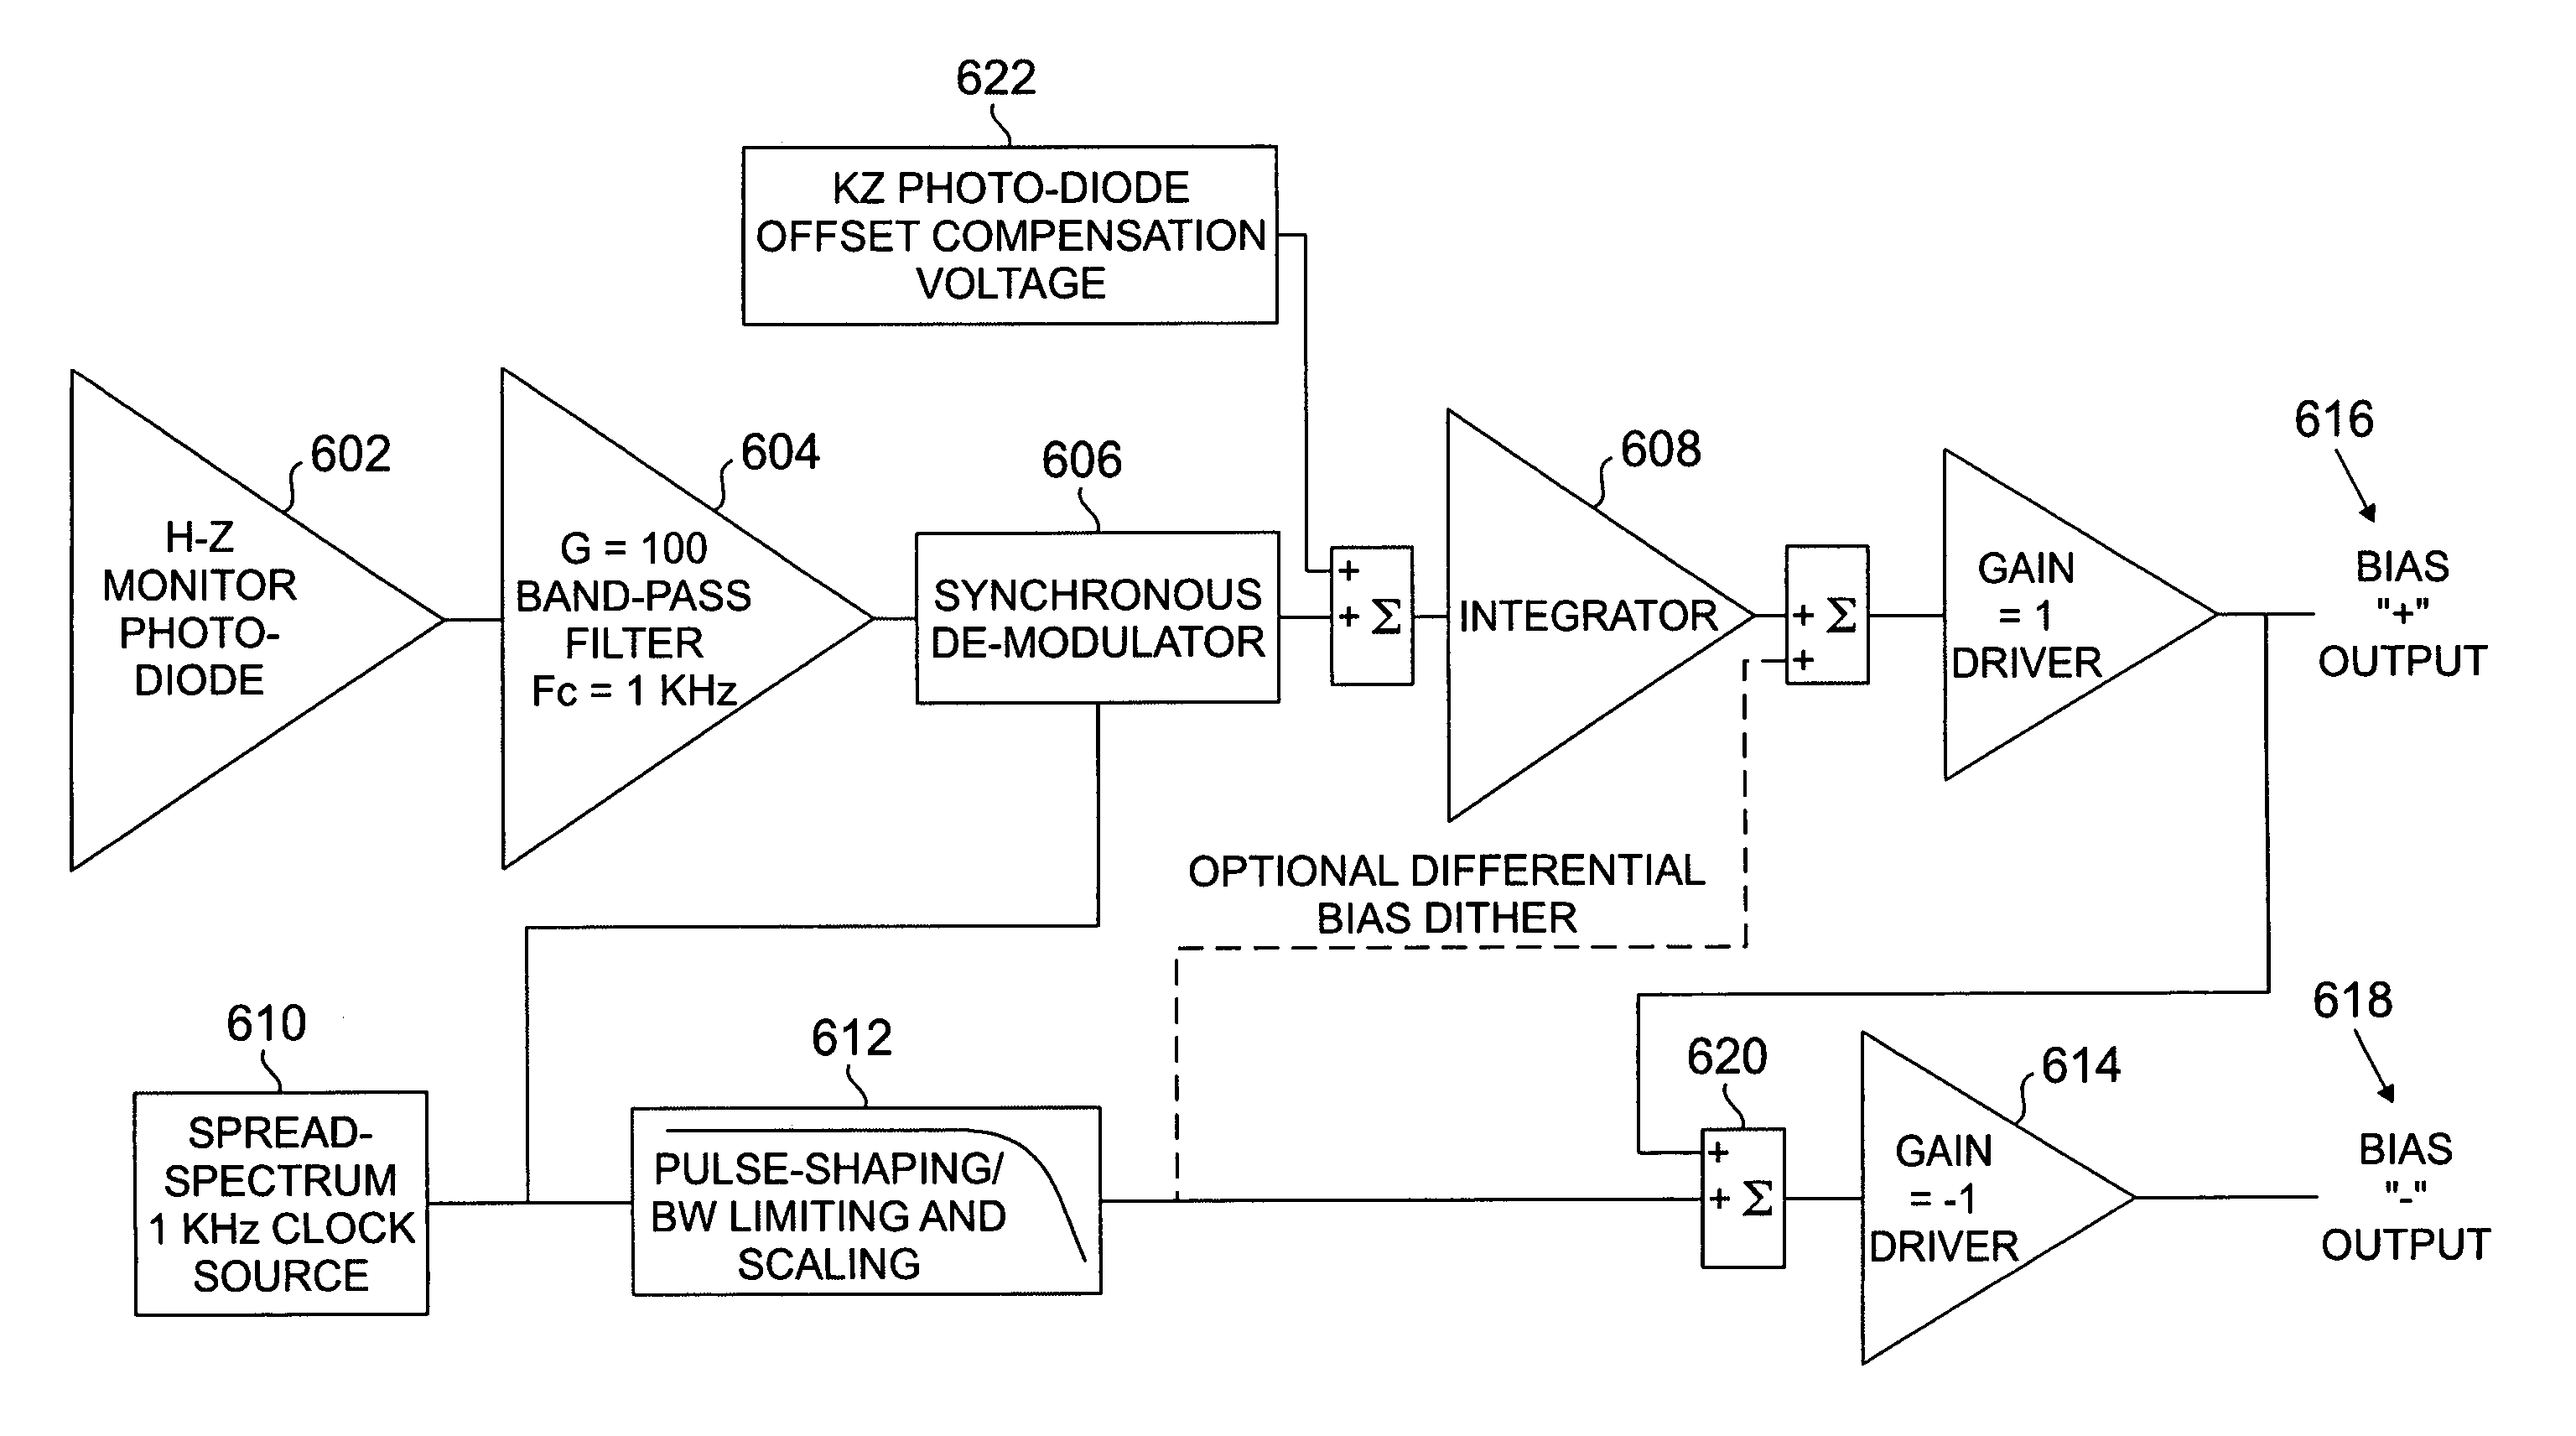 Automatic DC bias control for the duobinary modulation format utilizing a low-pass electrical filter